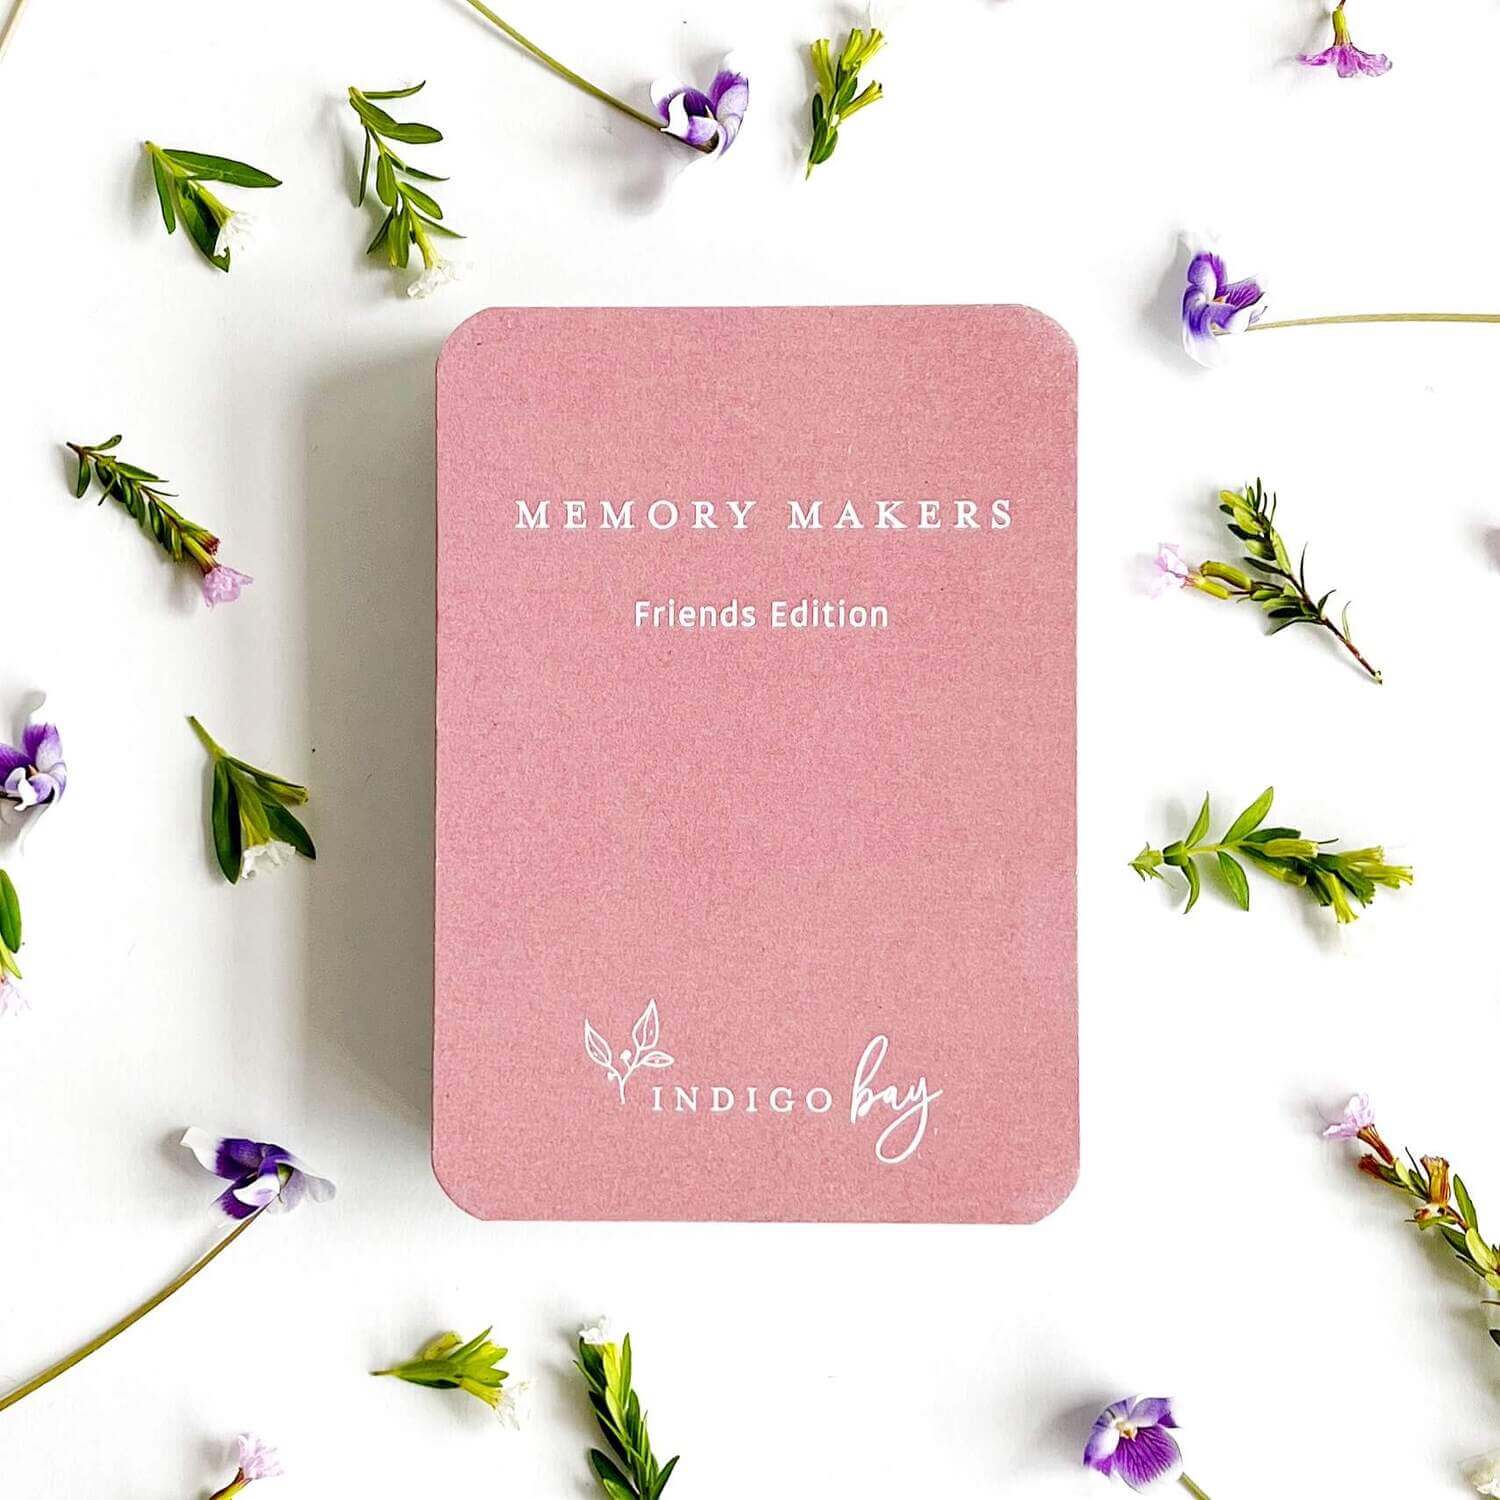 Memory Makers Friends Edition - deck of cards | 52 fun things to do with friends